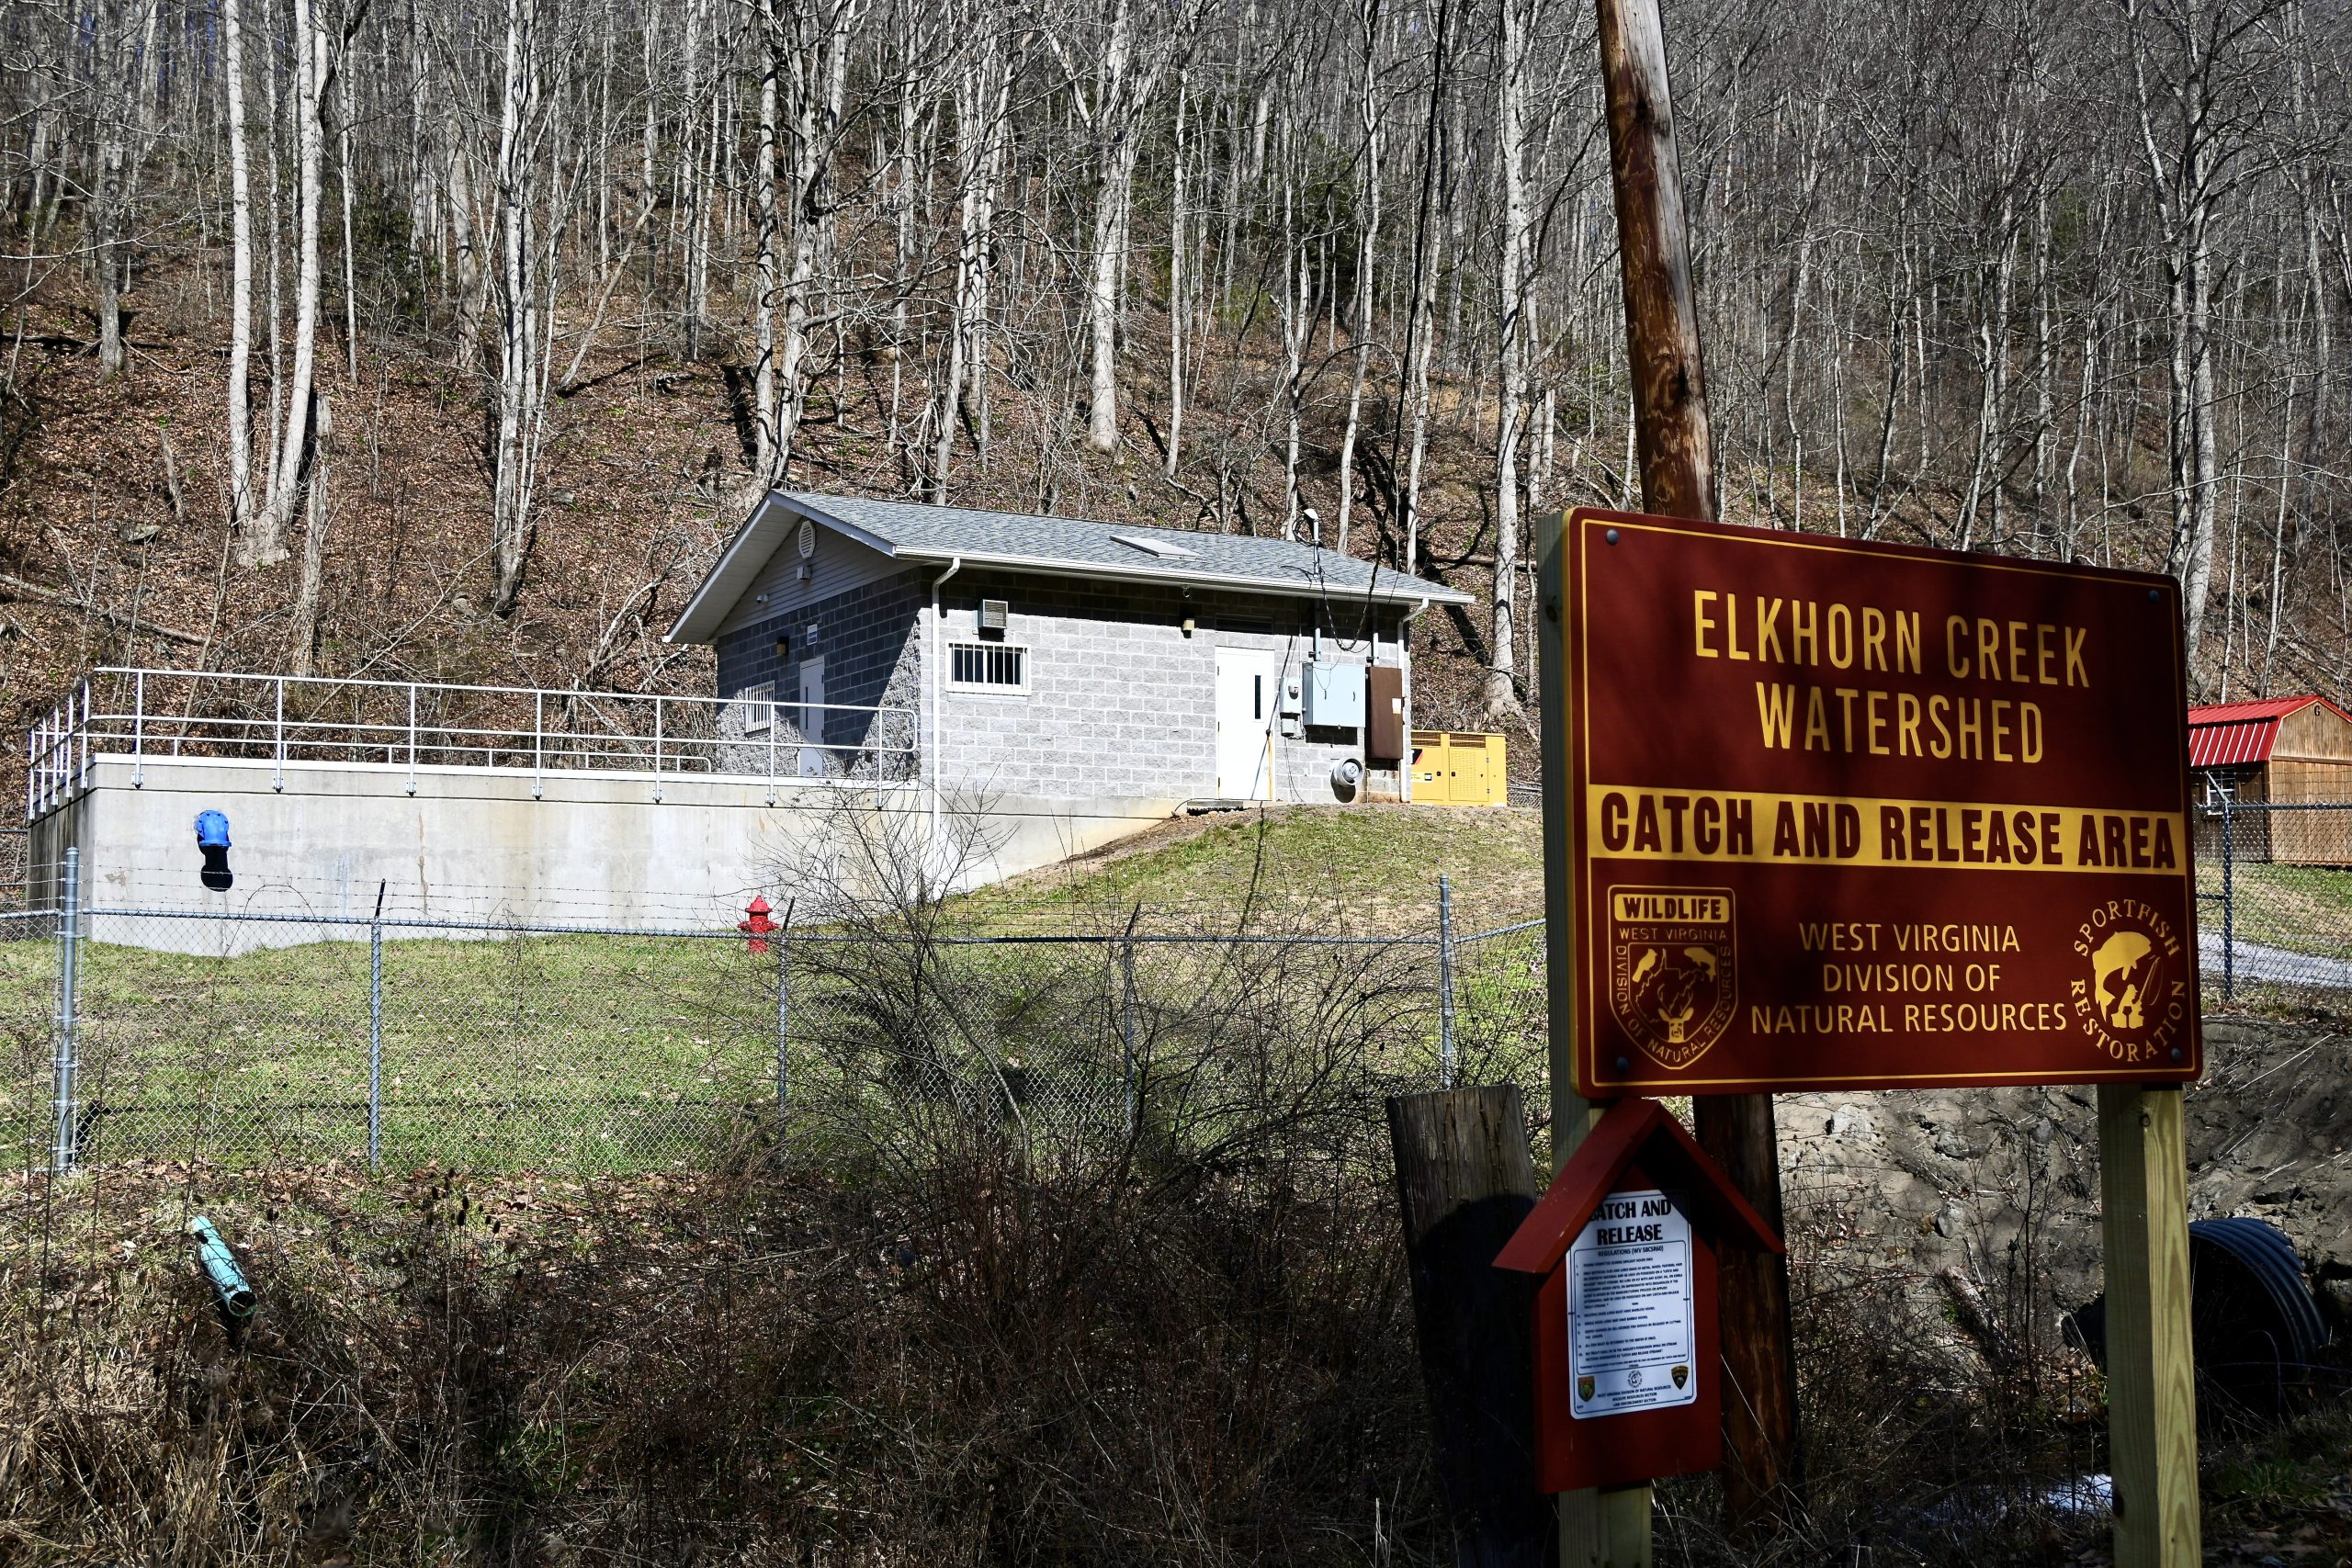 A cement block building sits behind a fence with barbed wire across the top. A sign in the foreground says "Elkhorn Creek Watershed, Catch and Release Area, West Virginia Division of Natural Resources."